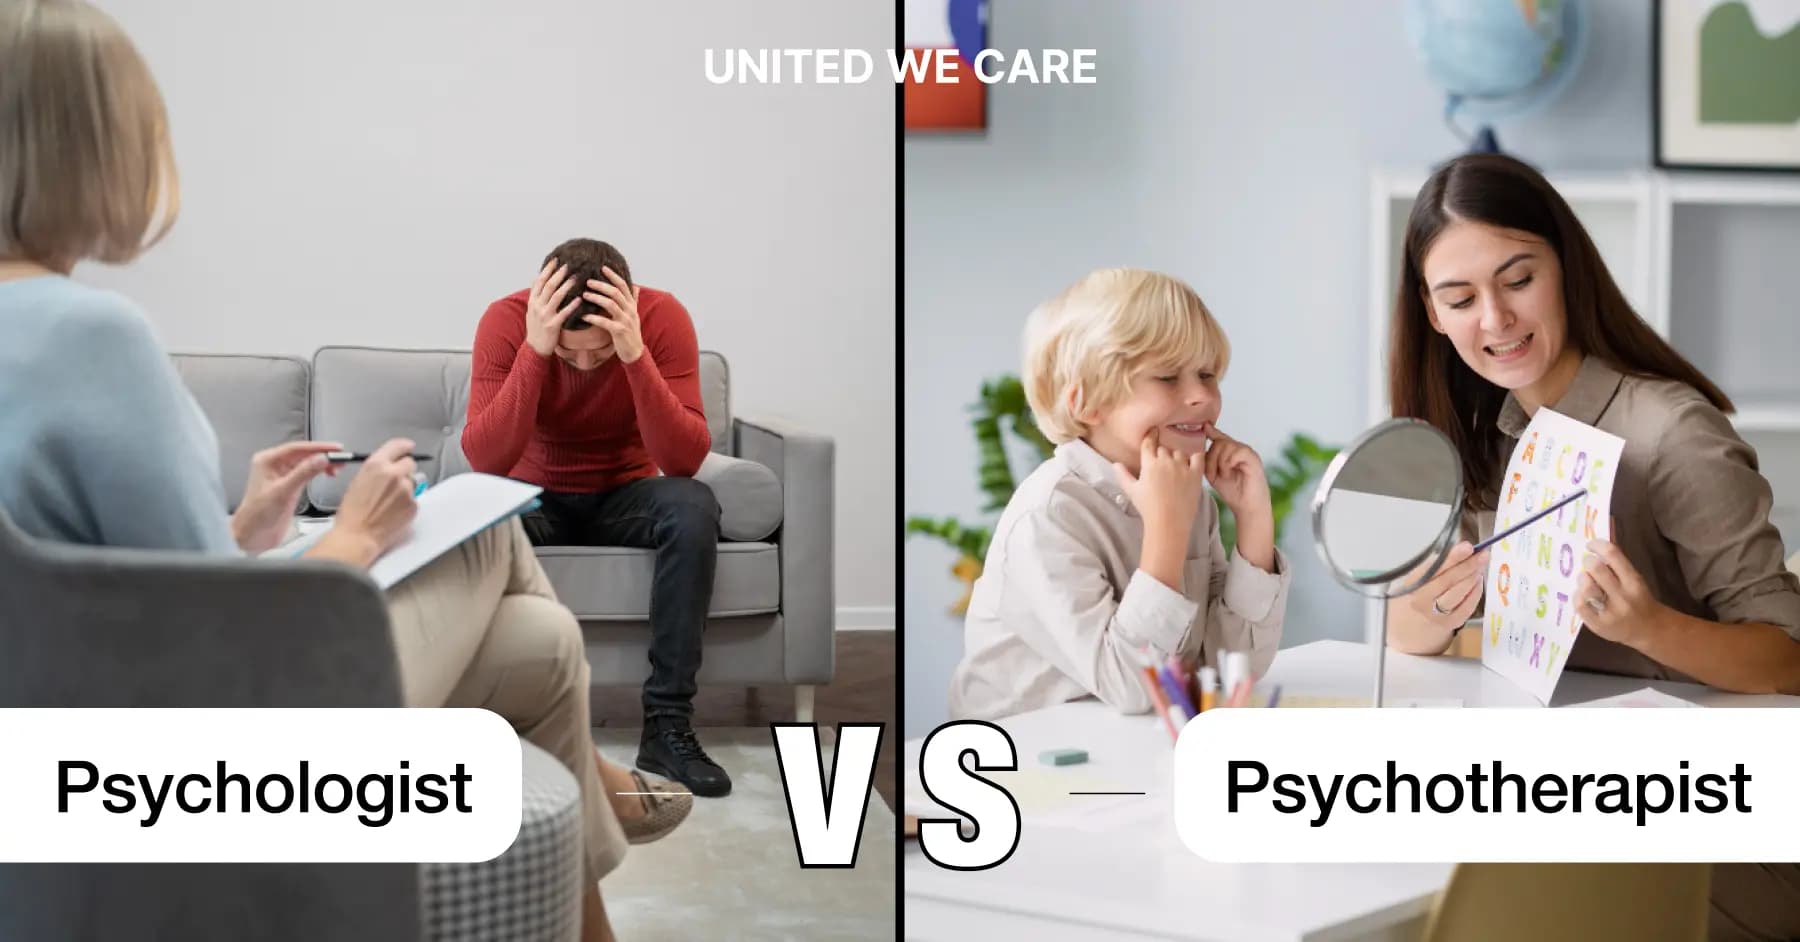 Psychologist Vs Psychotherapist: Which One Should You Choose